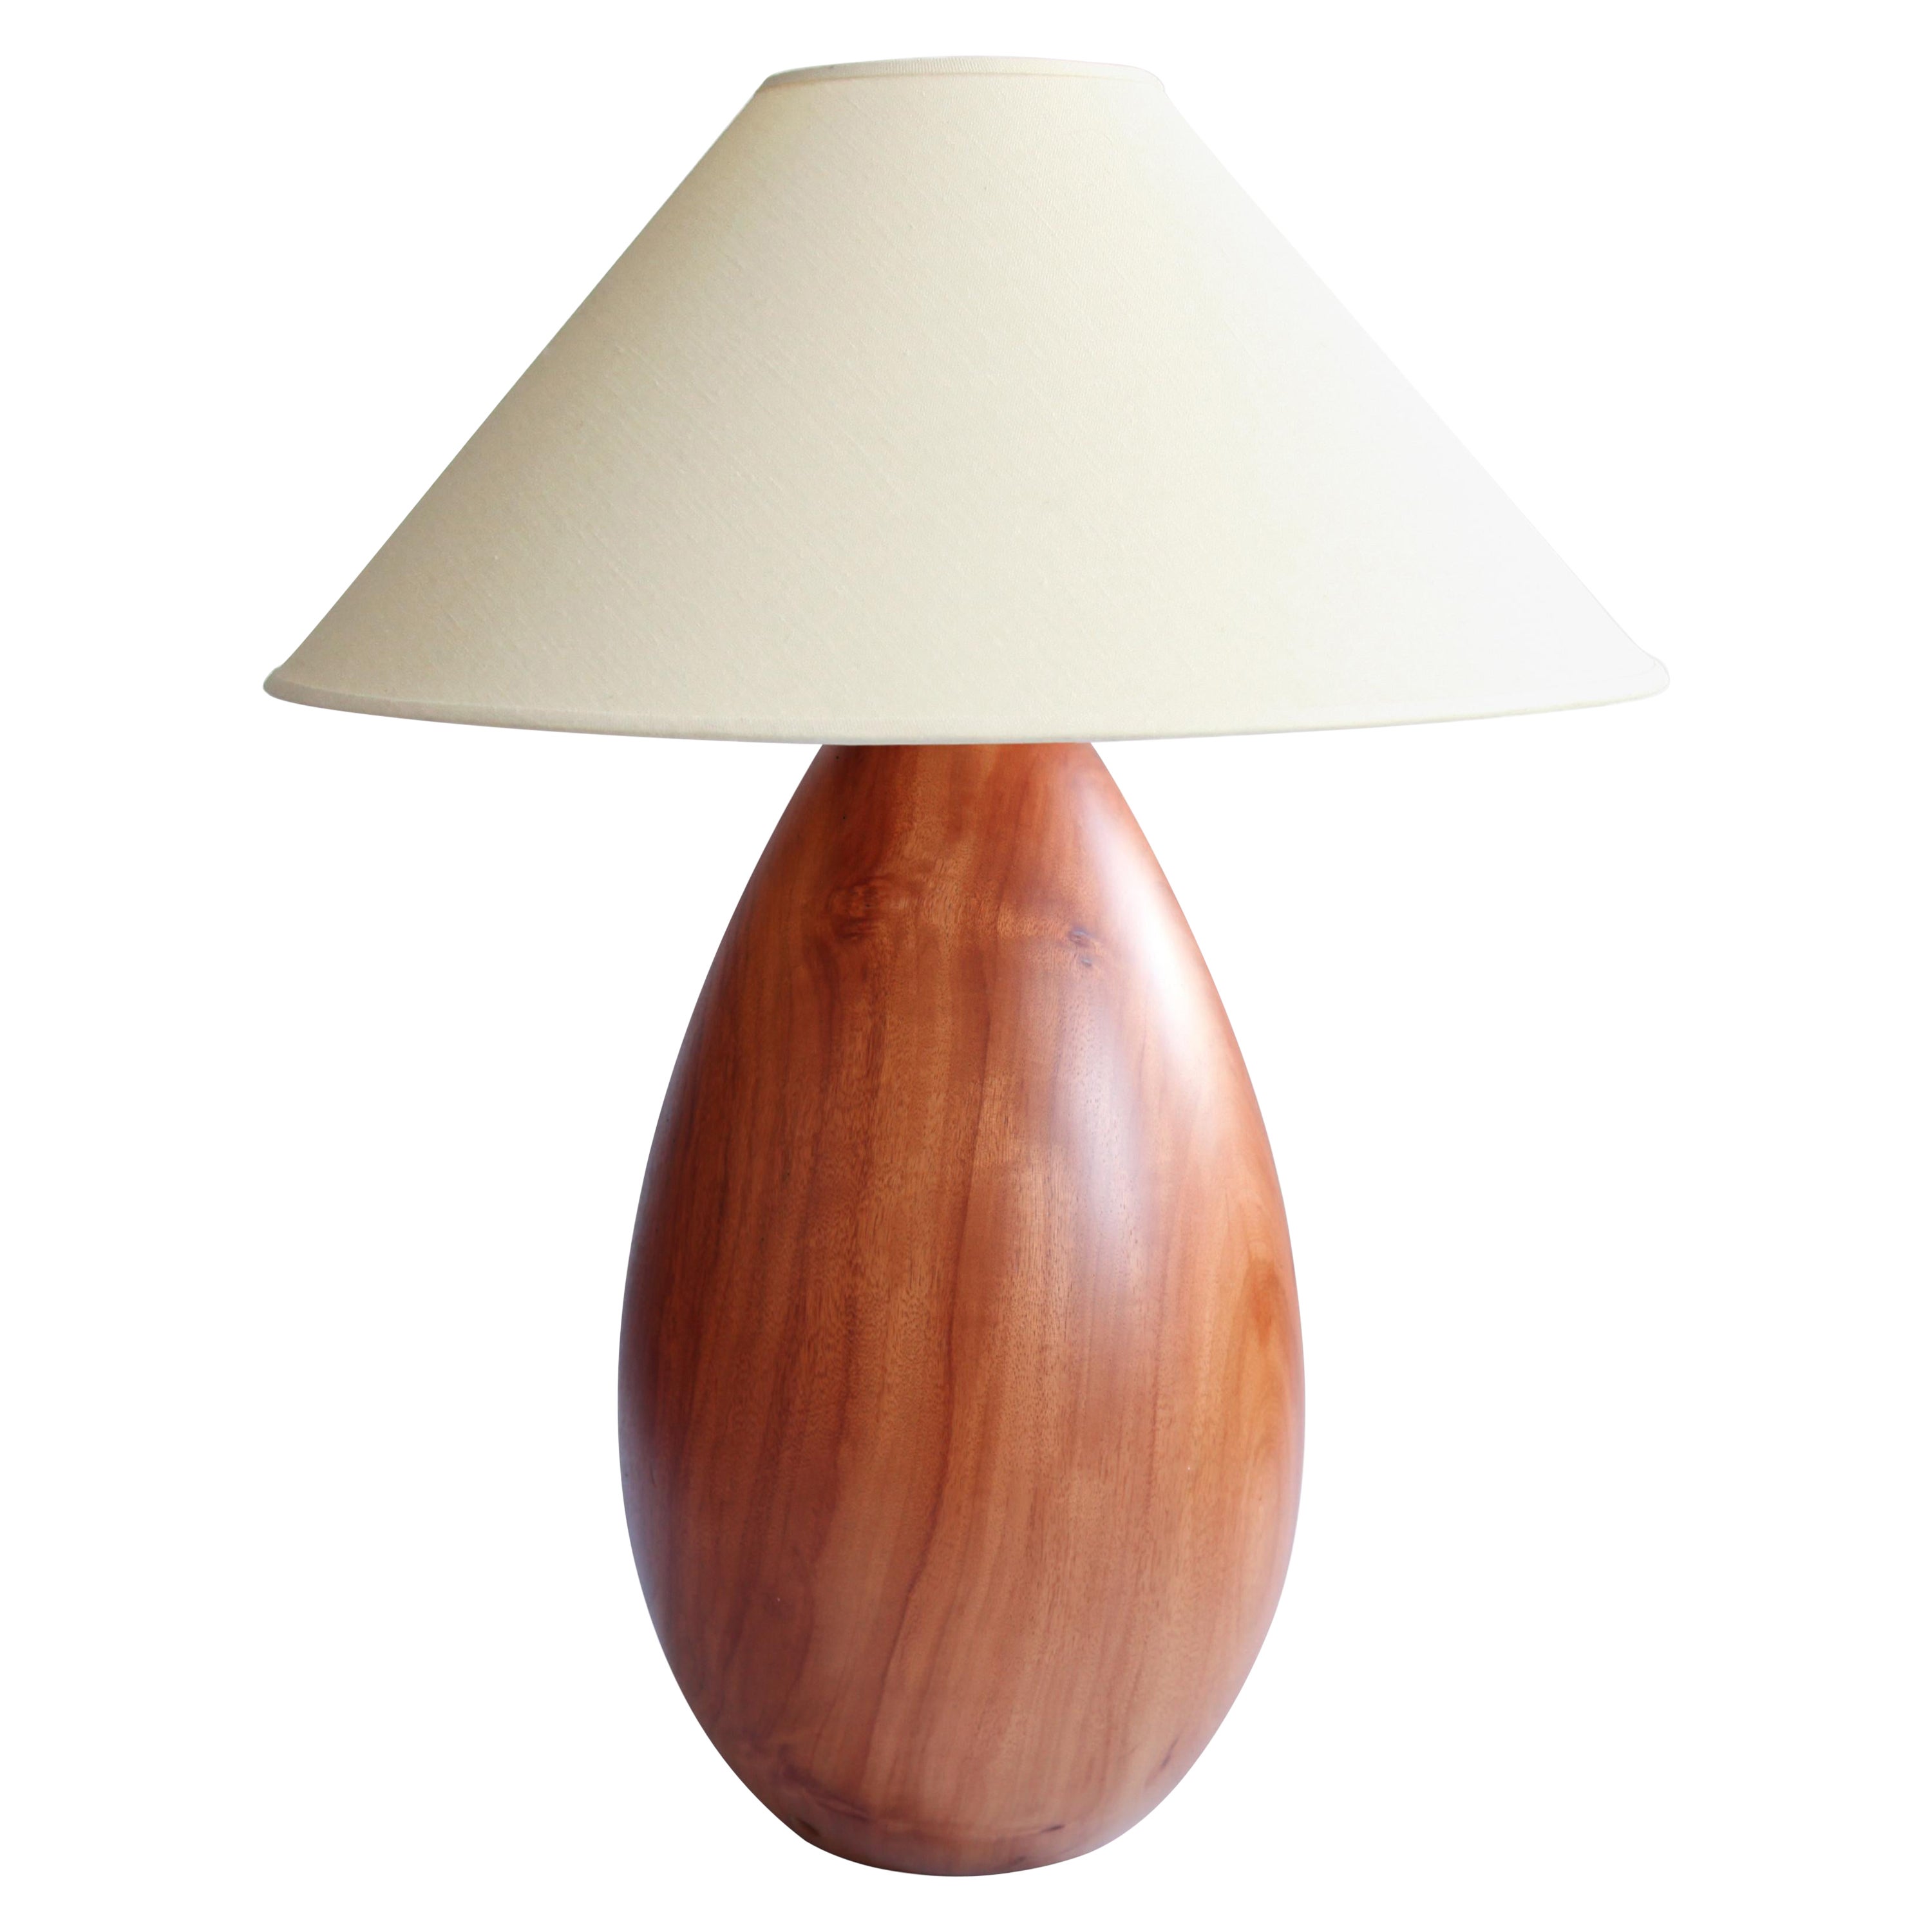 Tropical Hardwood Lamp + White Linen Shade, Extra Large, Árbol Collection, 51 For Sale